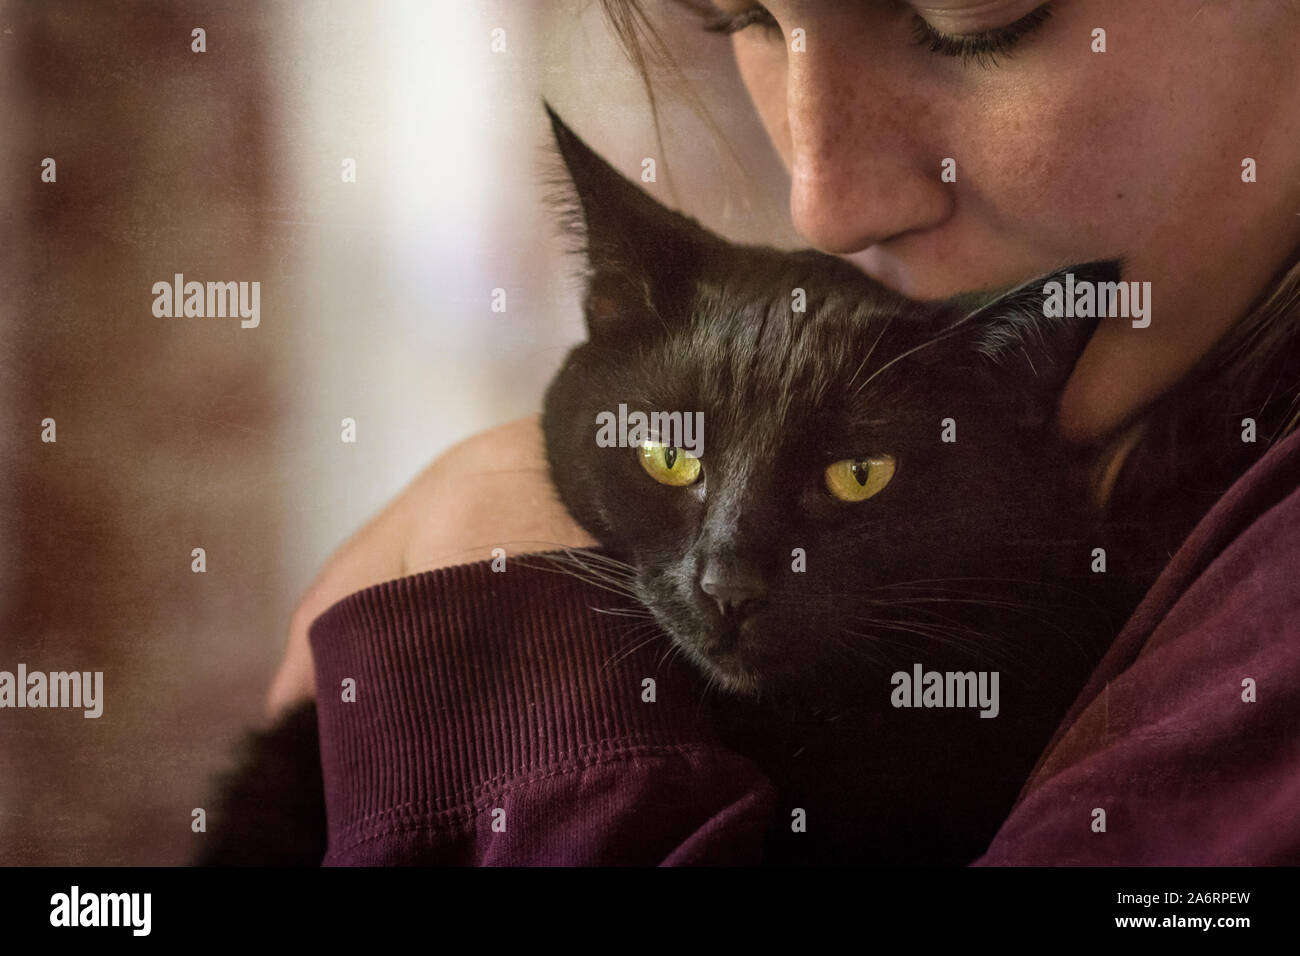 Young girl with freckles snuggles and kisses black cat Stock Photo